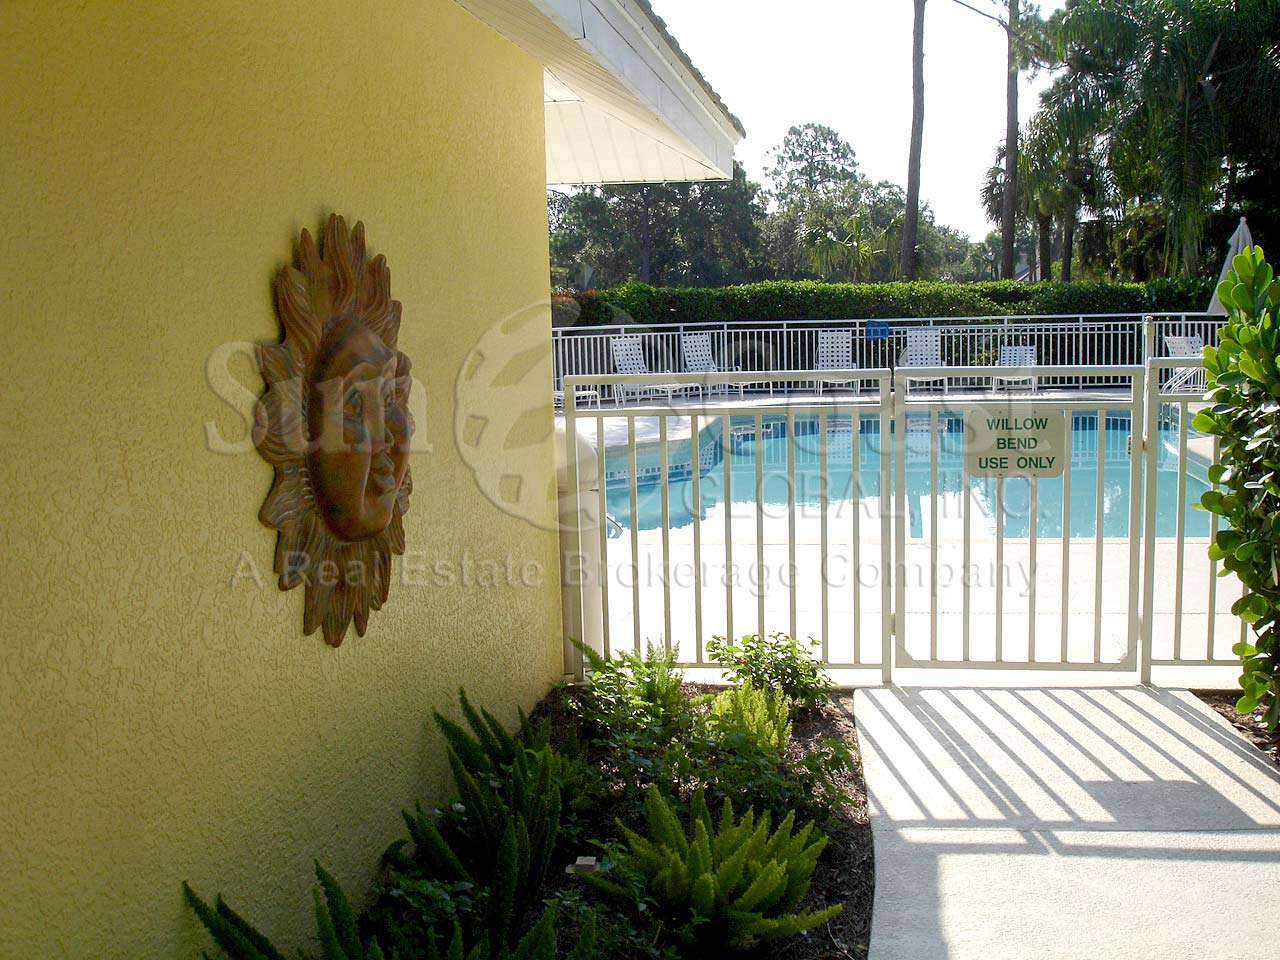 Entrance to the 3-6 foot community pool with stamped pool area